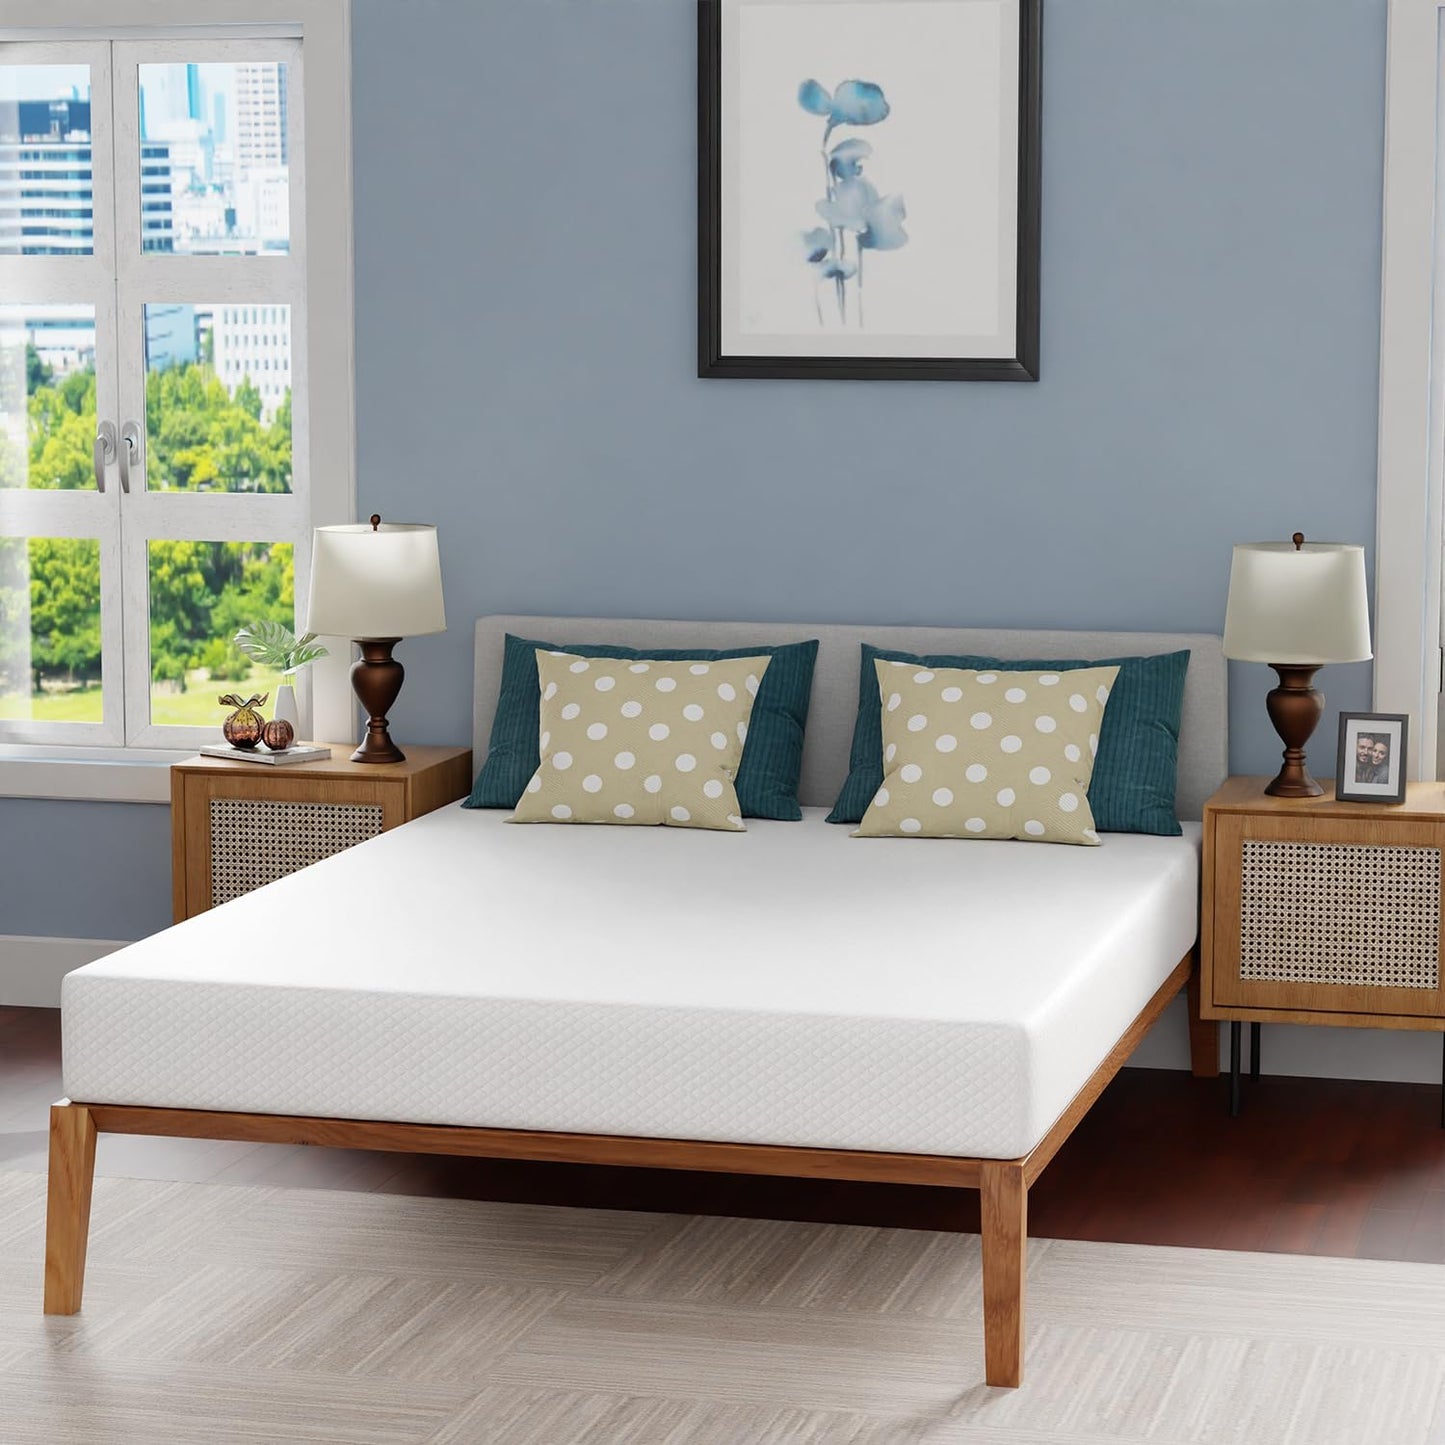 NEW - FDW 8 Inch QUEEN Gel Memory Foam Mattress for Cool Sleep & Pressure Relief, Medium Firm Mattresses CertiPUR-US Certified/Bed-in-a-Box/Pressure Relieving - Retail $159